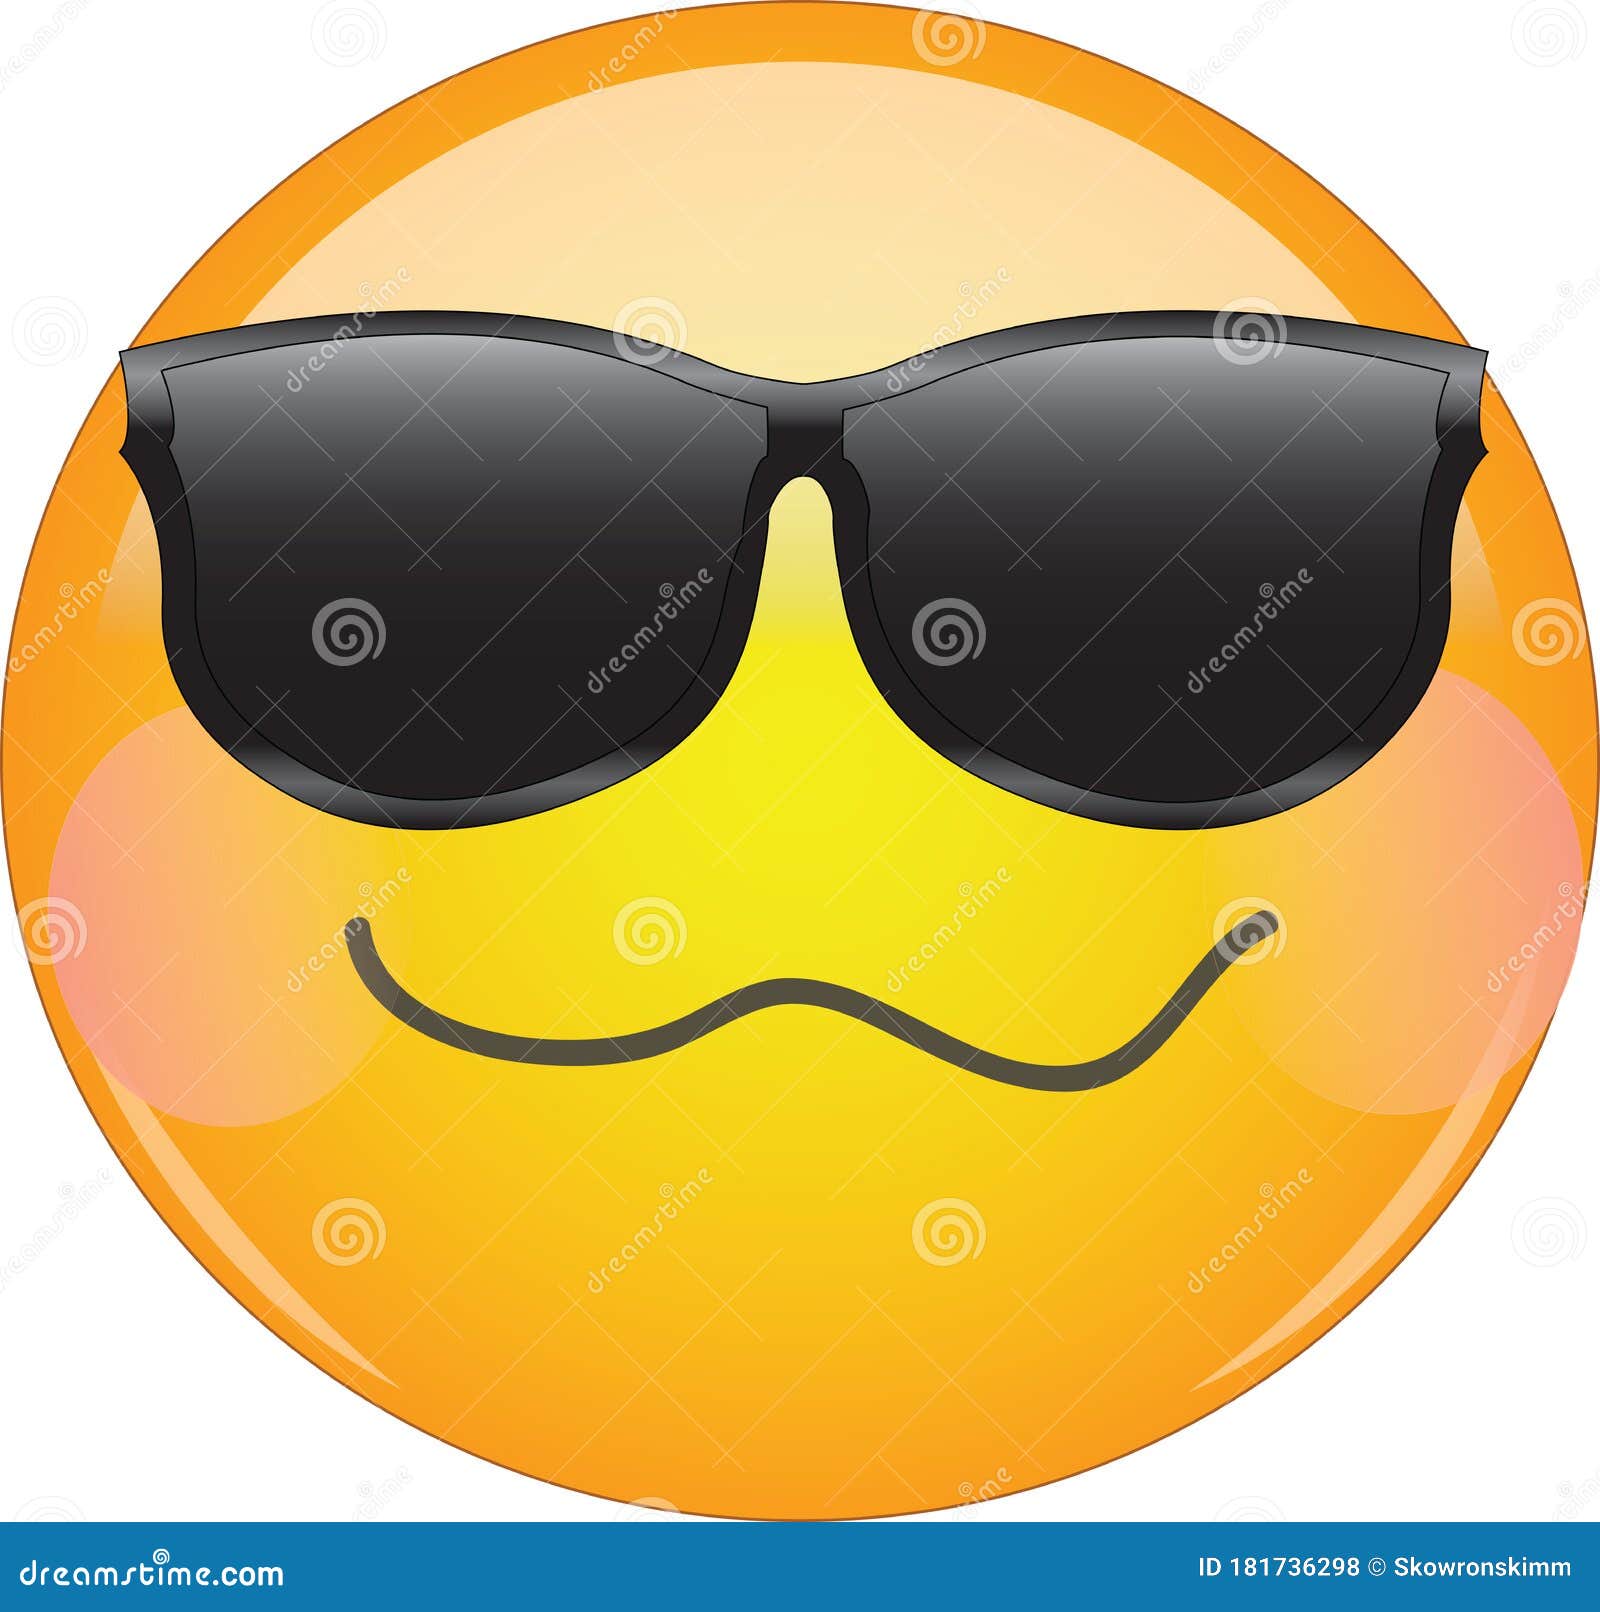 cool drunken blushing emoji. yellow face emoticon wearing sunglasses with a crumpled mouth, and blush on cheeks expressing drunken